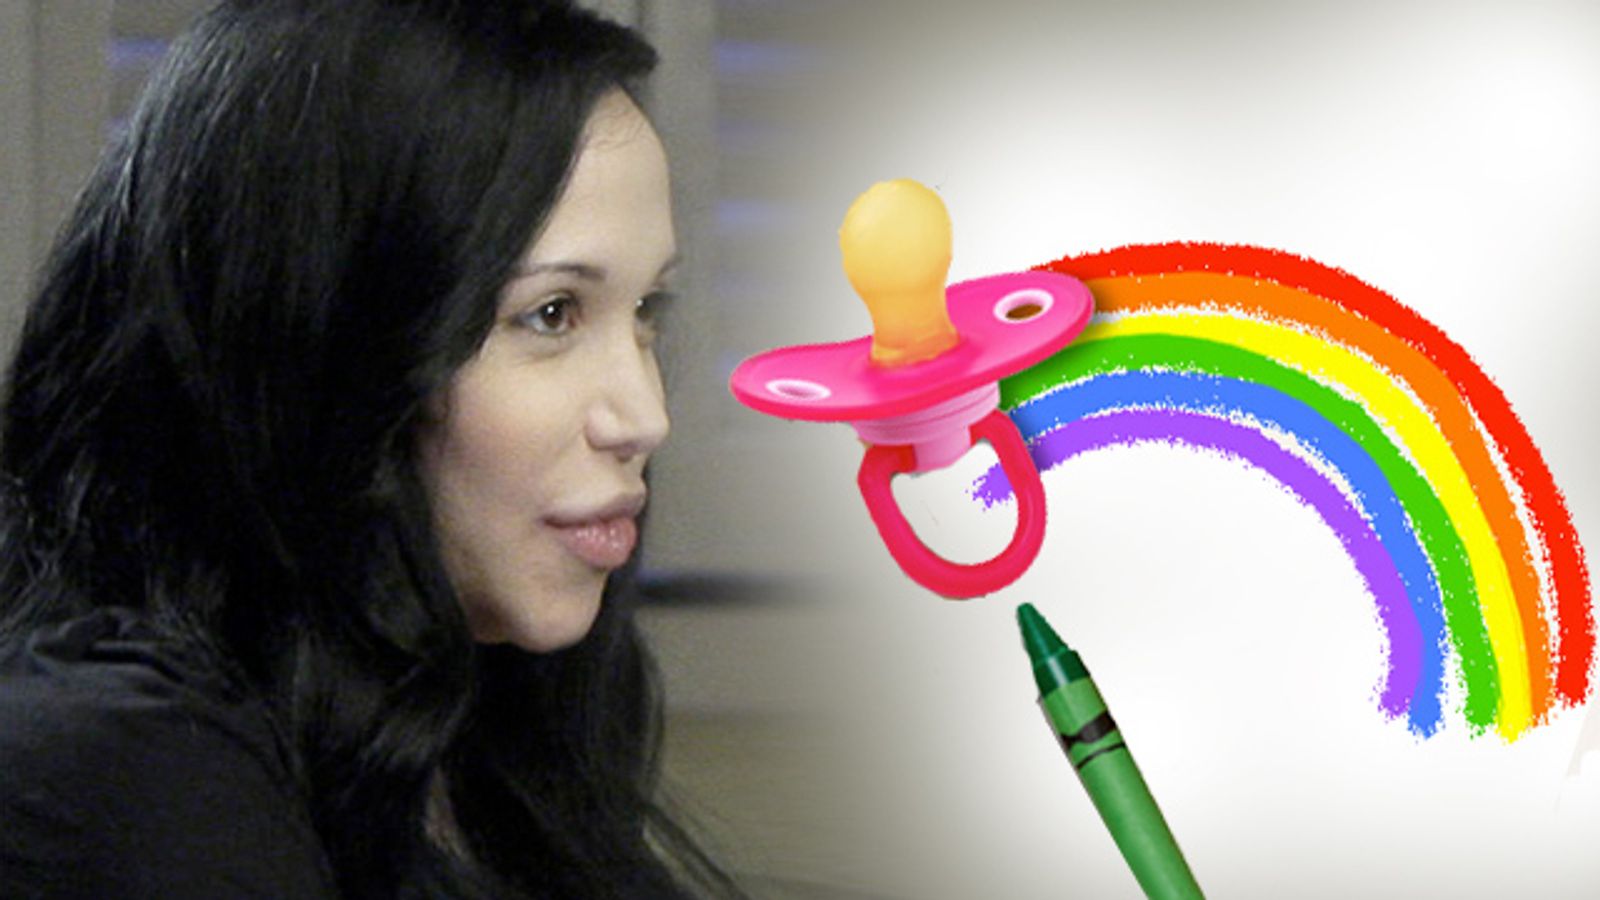 Vivid Pitches Octomom Reality Show